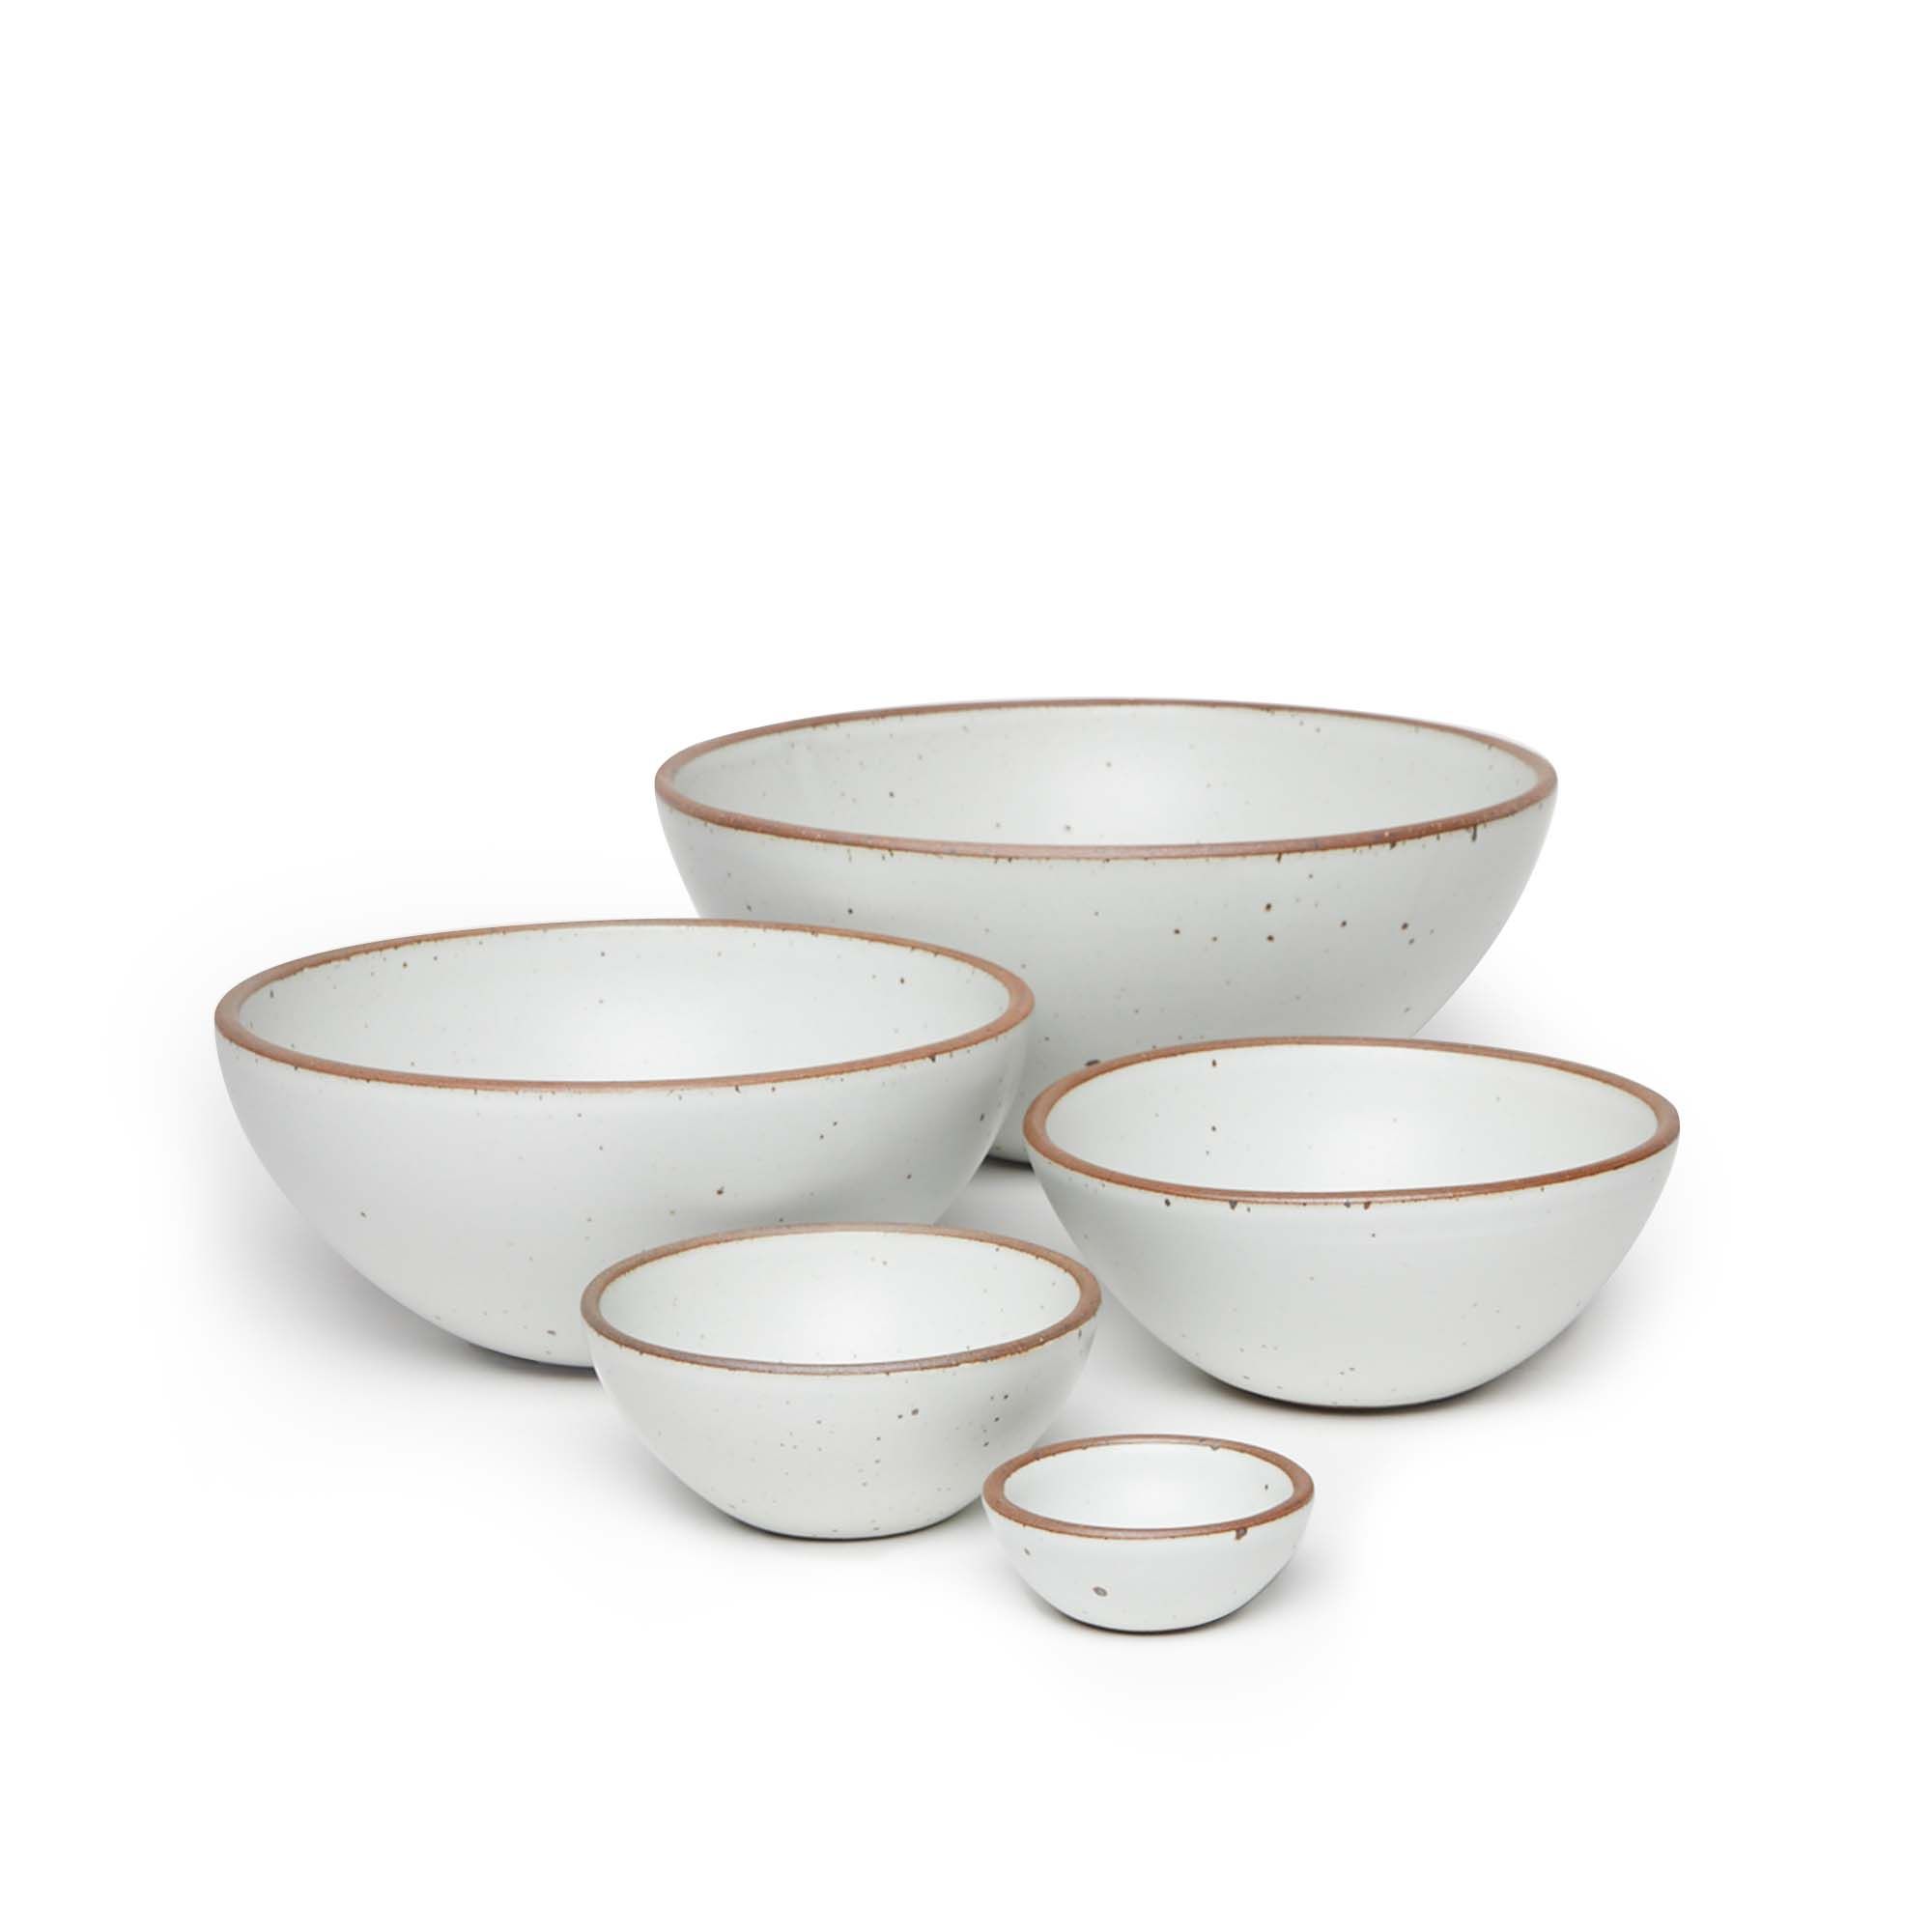 A bitty bowl, ice cream bowl, soup bowl, popcorn bowl, and mixing bowl paired together in a cool white color featuring iron speckles.